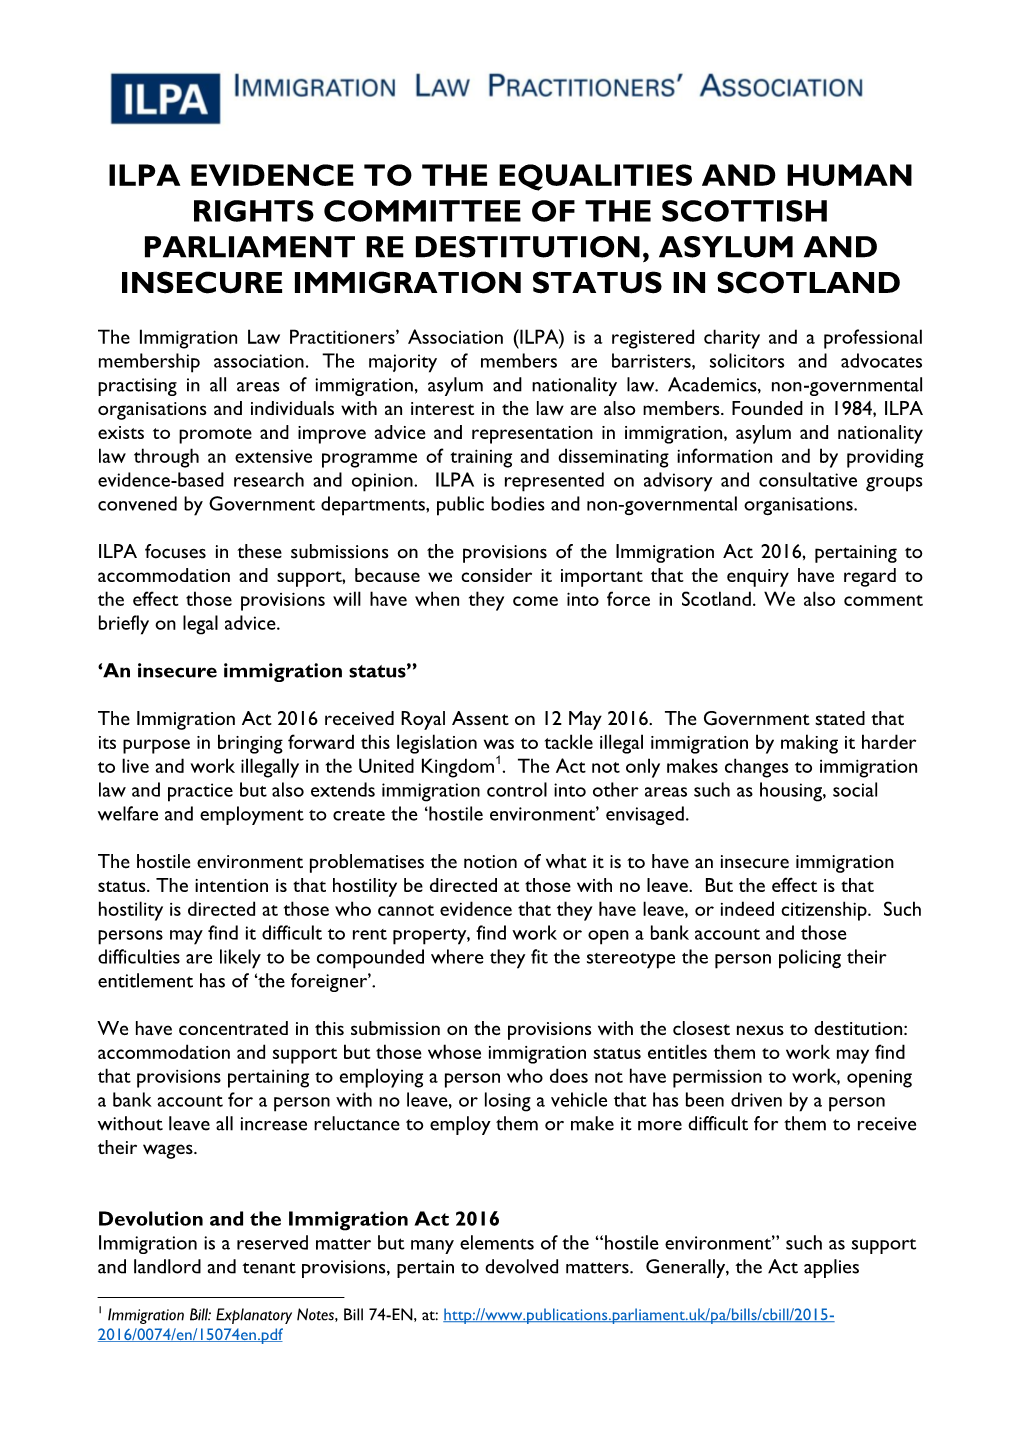 Ilpa Evidence to the Equalities and Human Rights Committee of the Scottish Parliament Re Destitution, Asylum and Insecure Immigration Status in Scotland